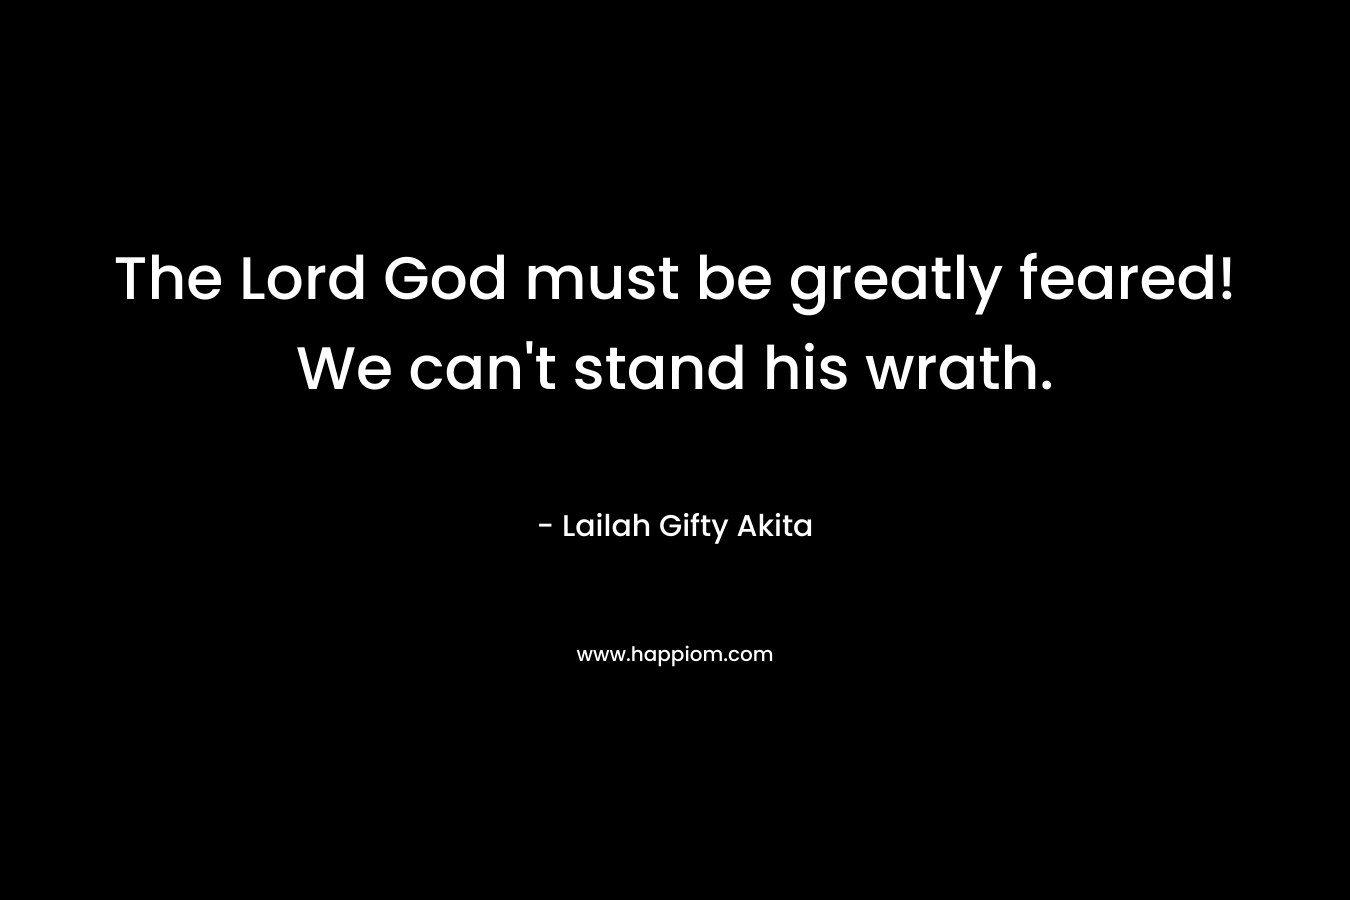 The Lord God must be greatly feared! We can't stand his wrath.